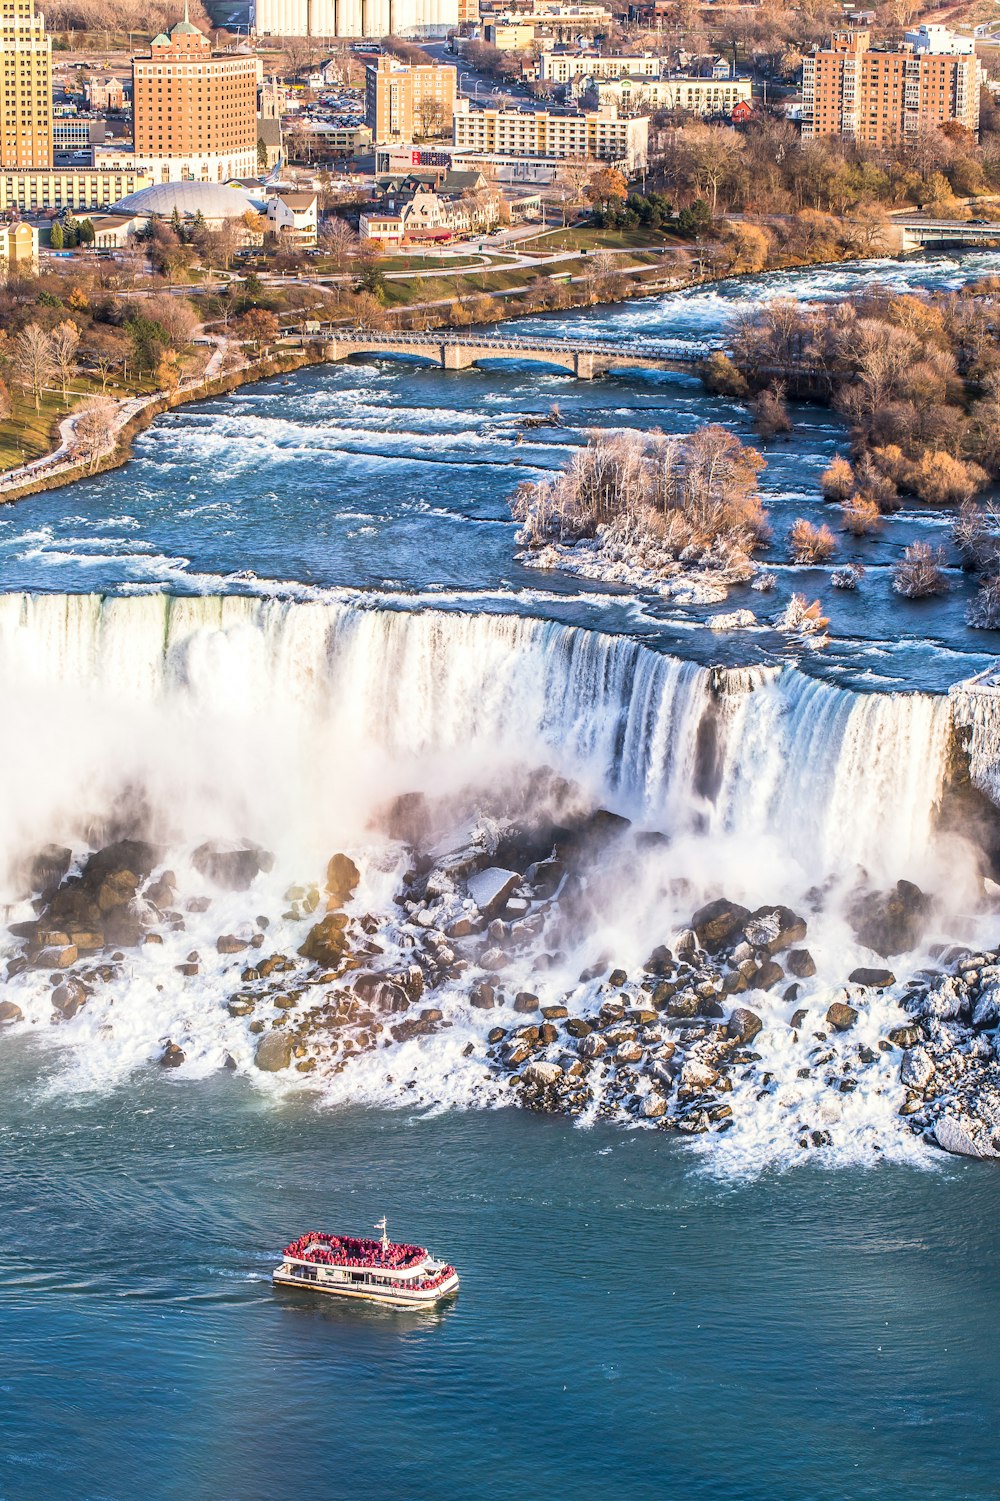 people surfing on water falls during daytime